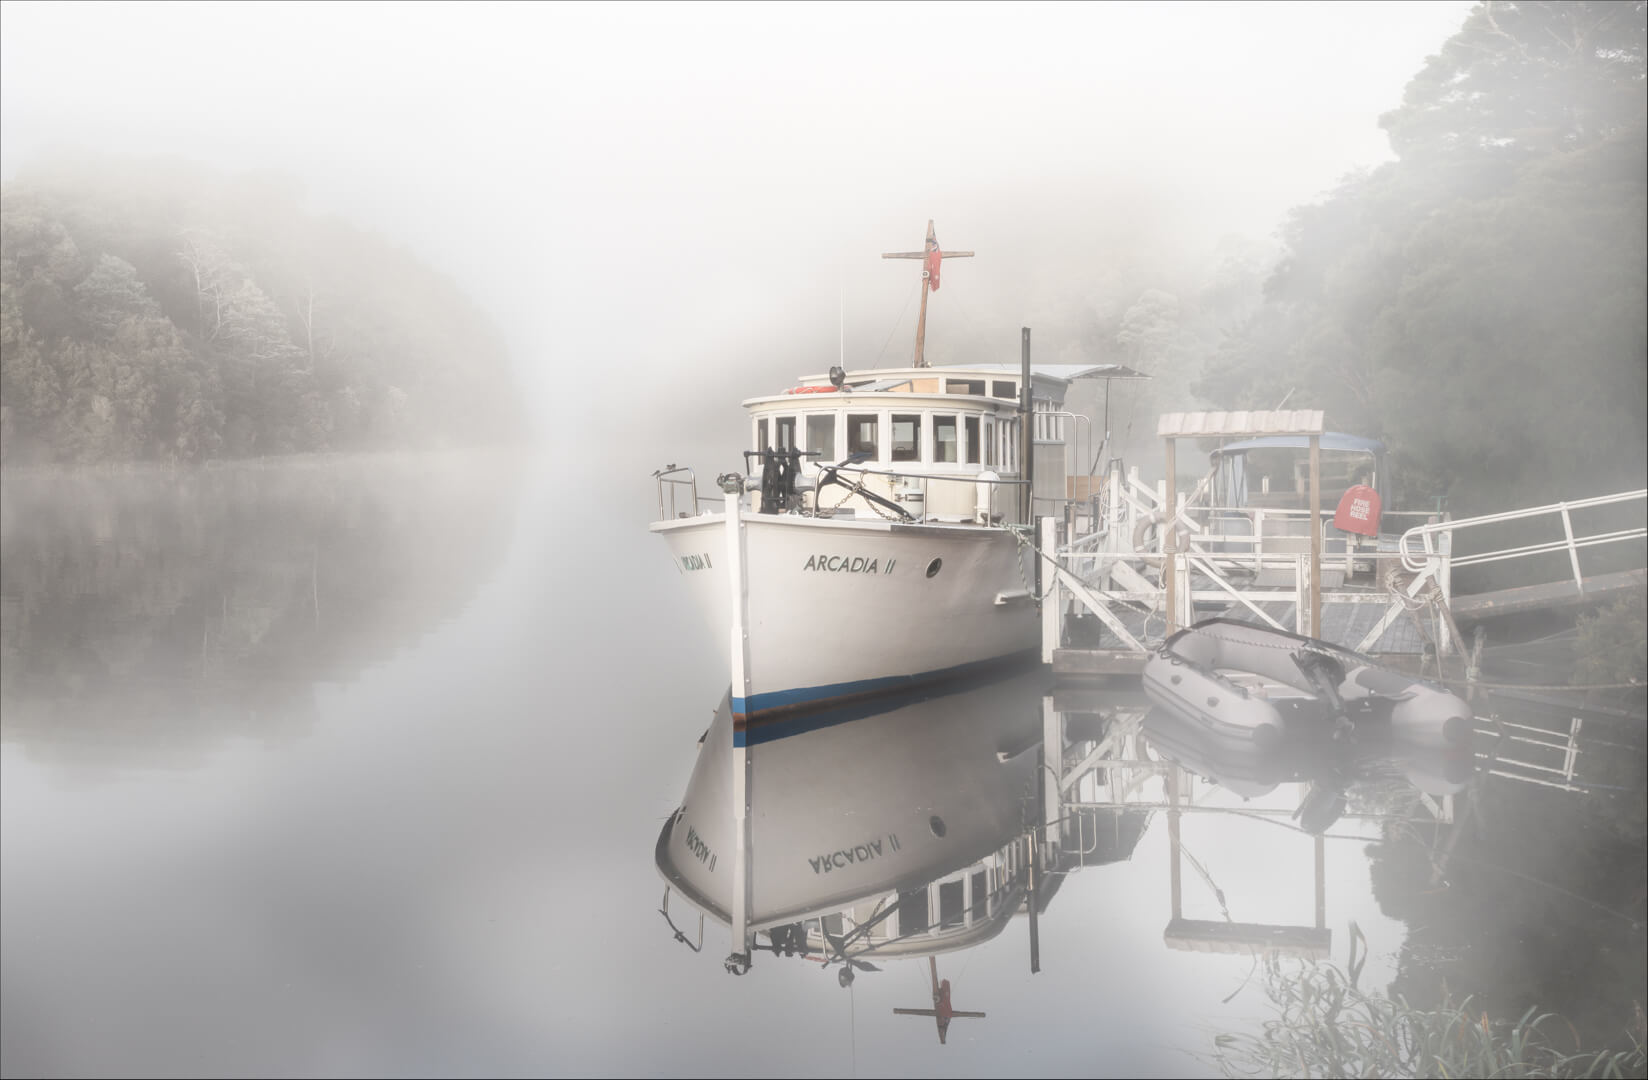 Honour For Print Misty Morning On The Pieman River By Paul MacKay